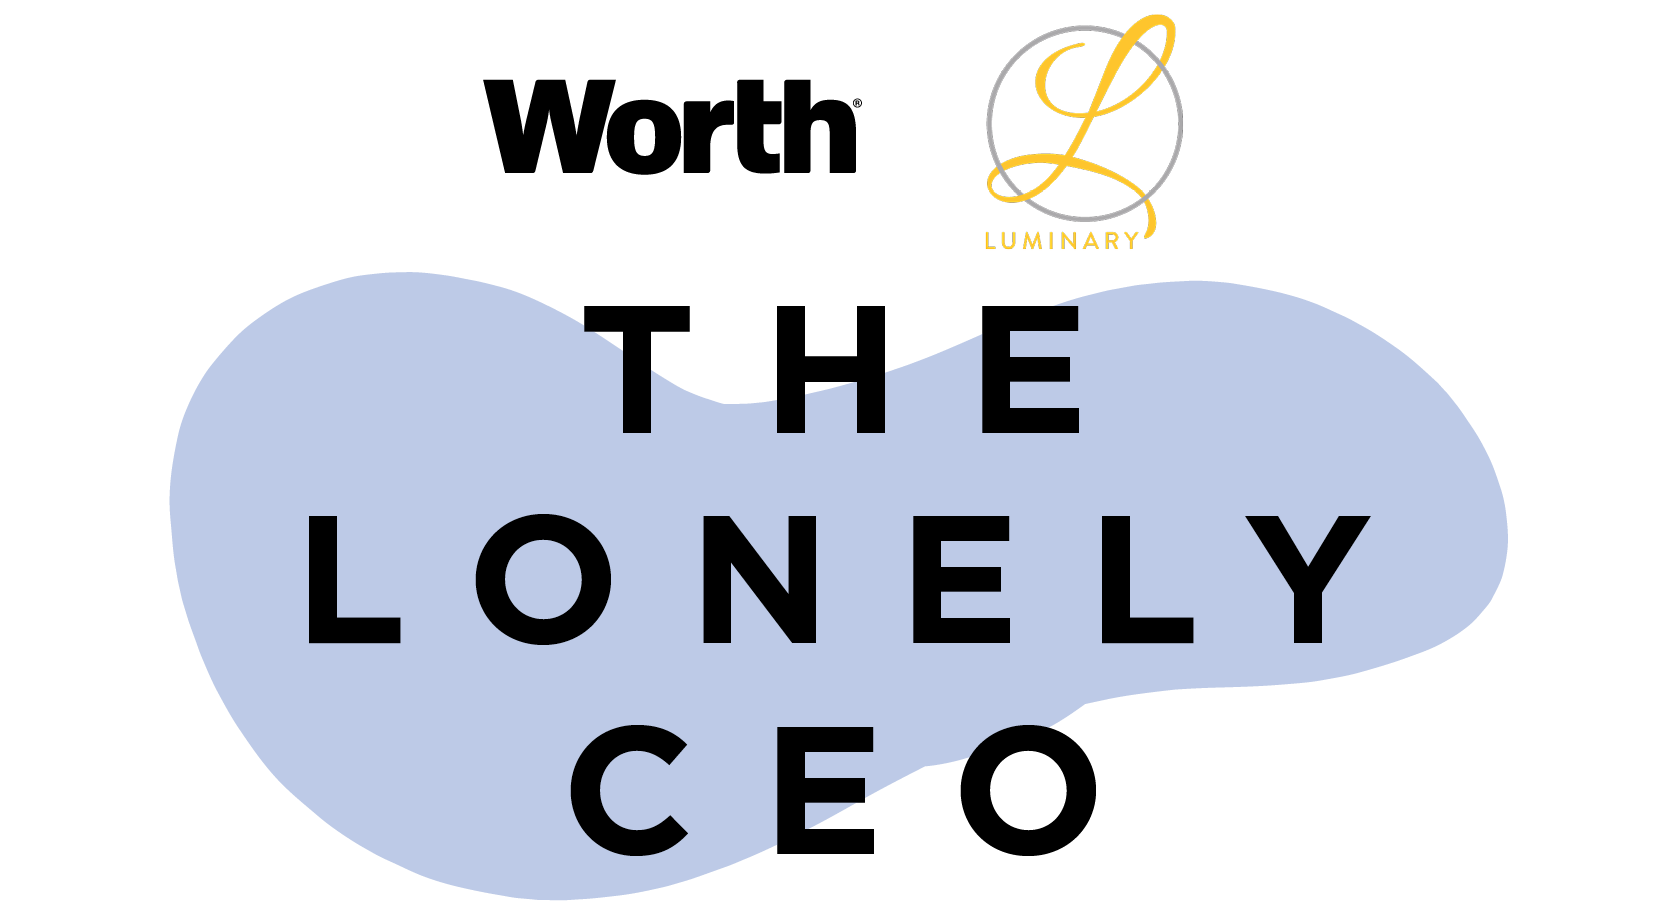 RSVP Now for The Lonely CEO|The Challenges & Opportunities of Remote Leading and the Power of Partnerships - Tuesday